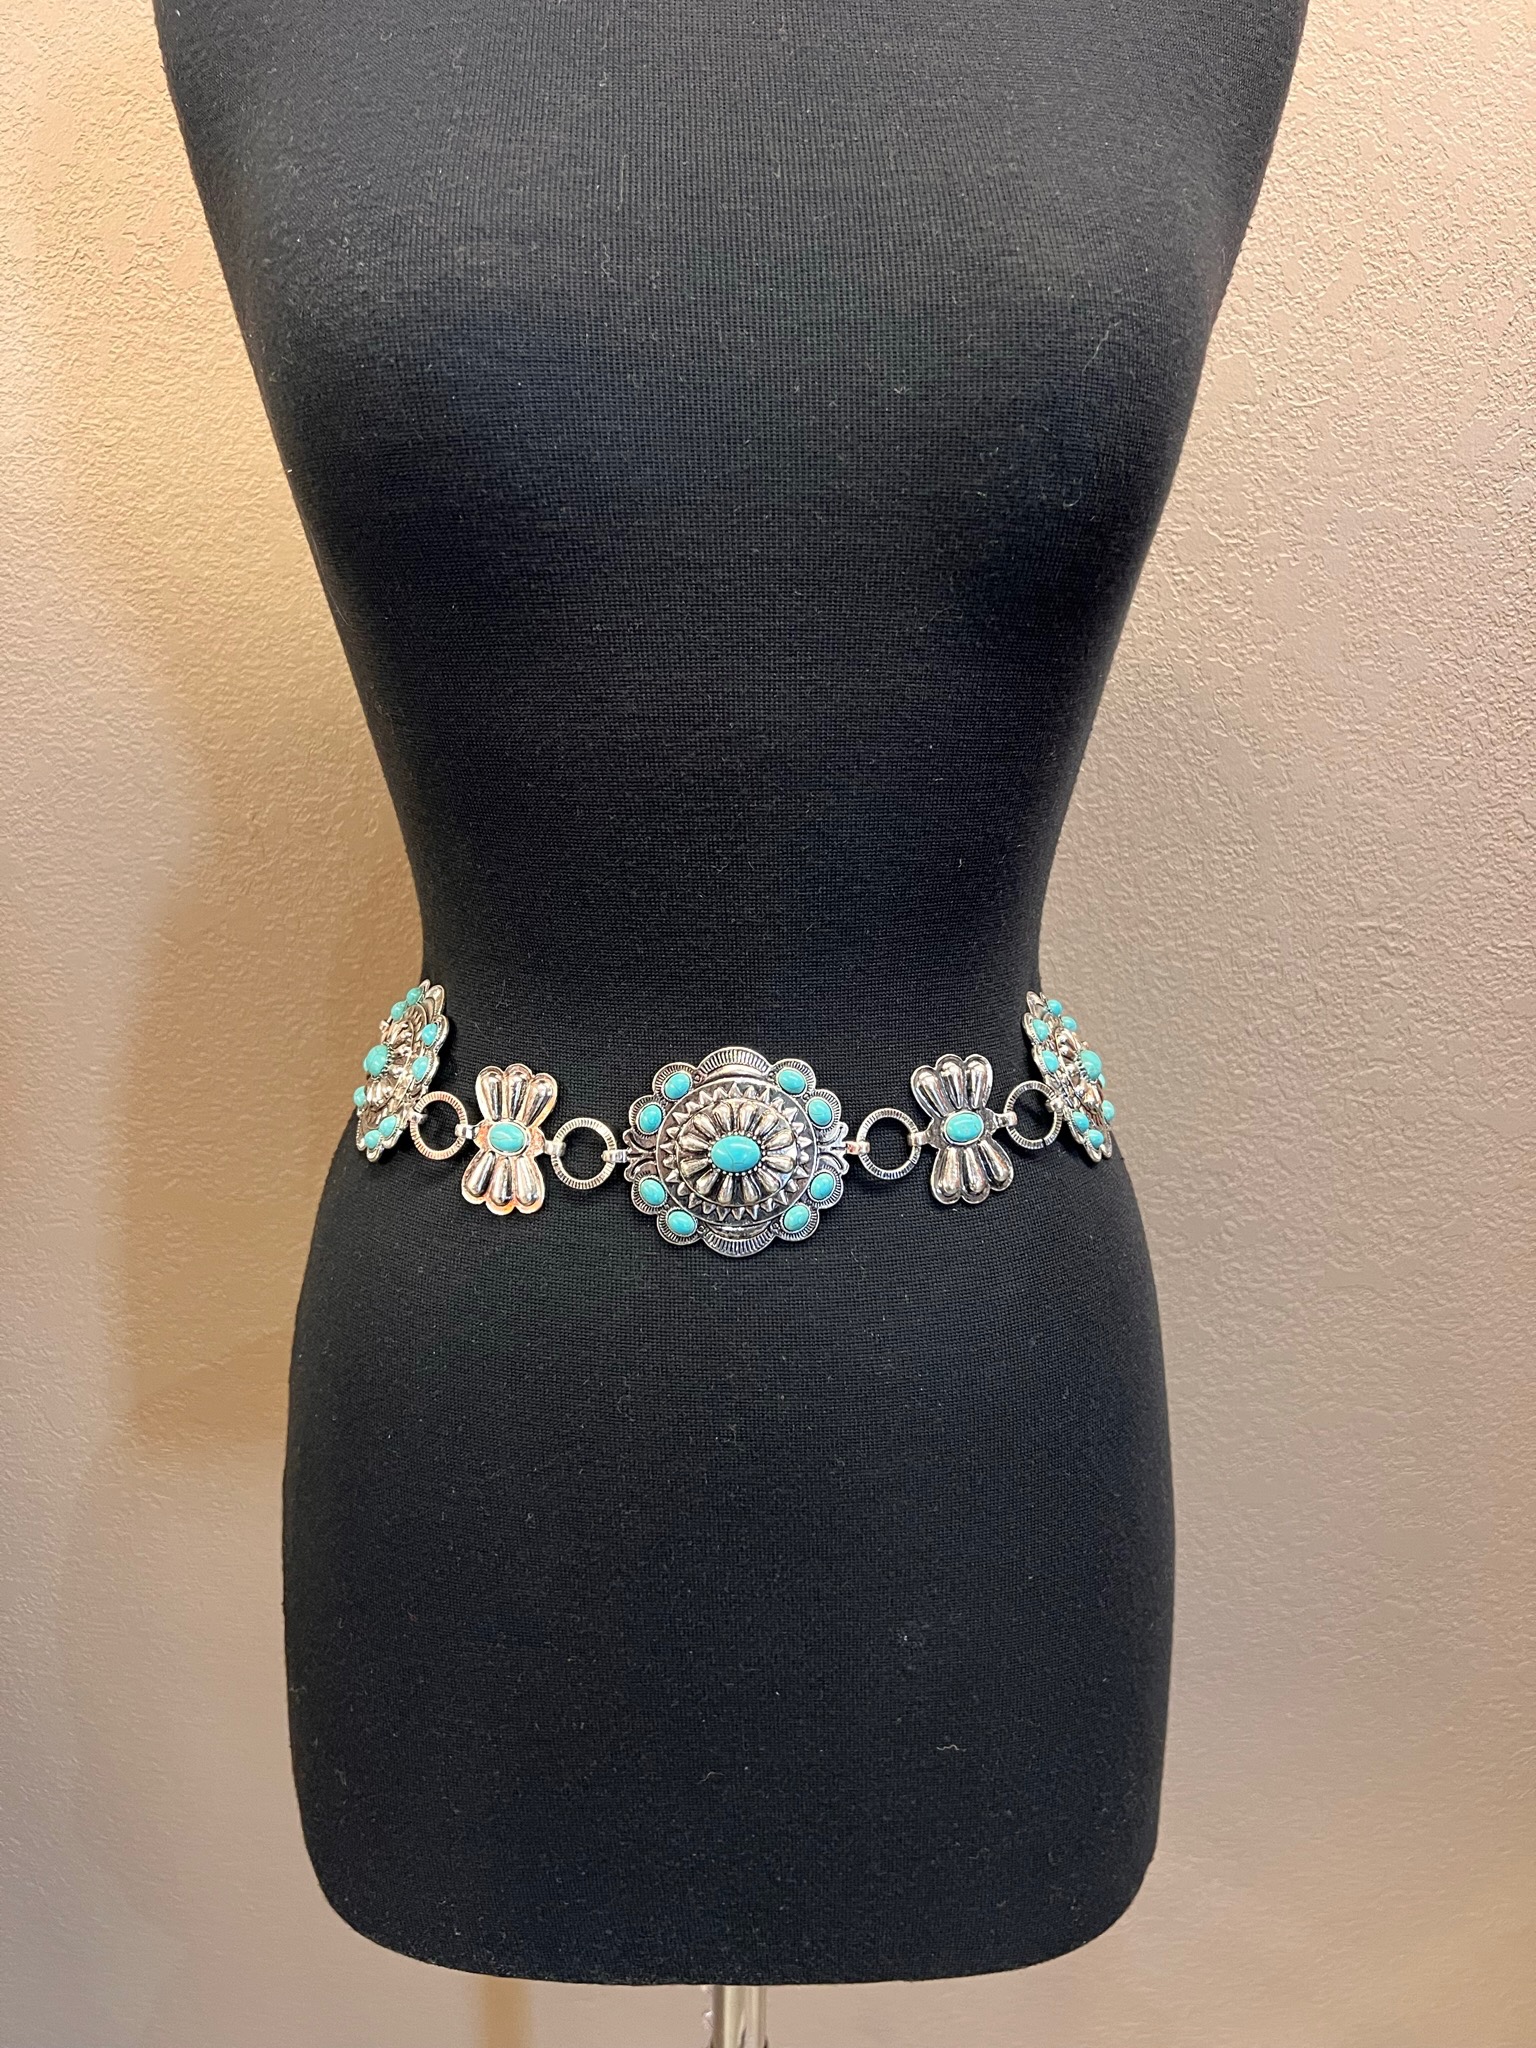 Butterfly Scalloped Edge Concho Belt